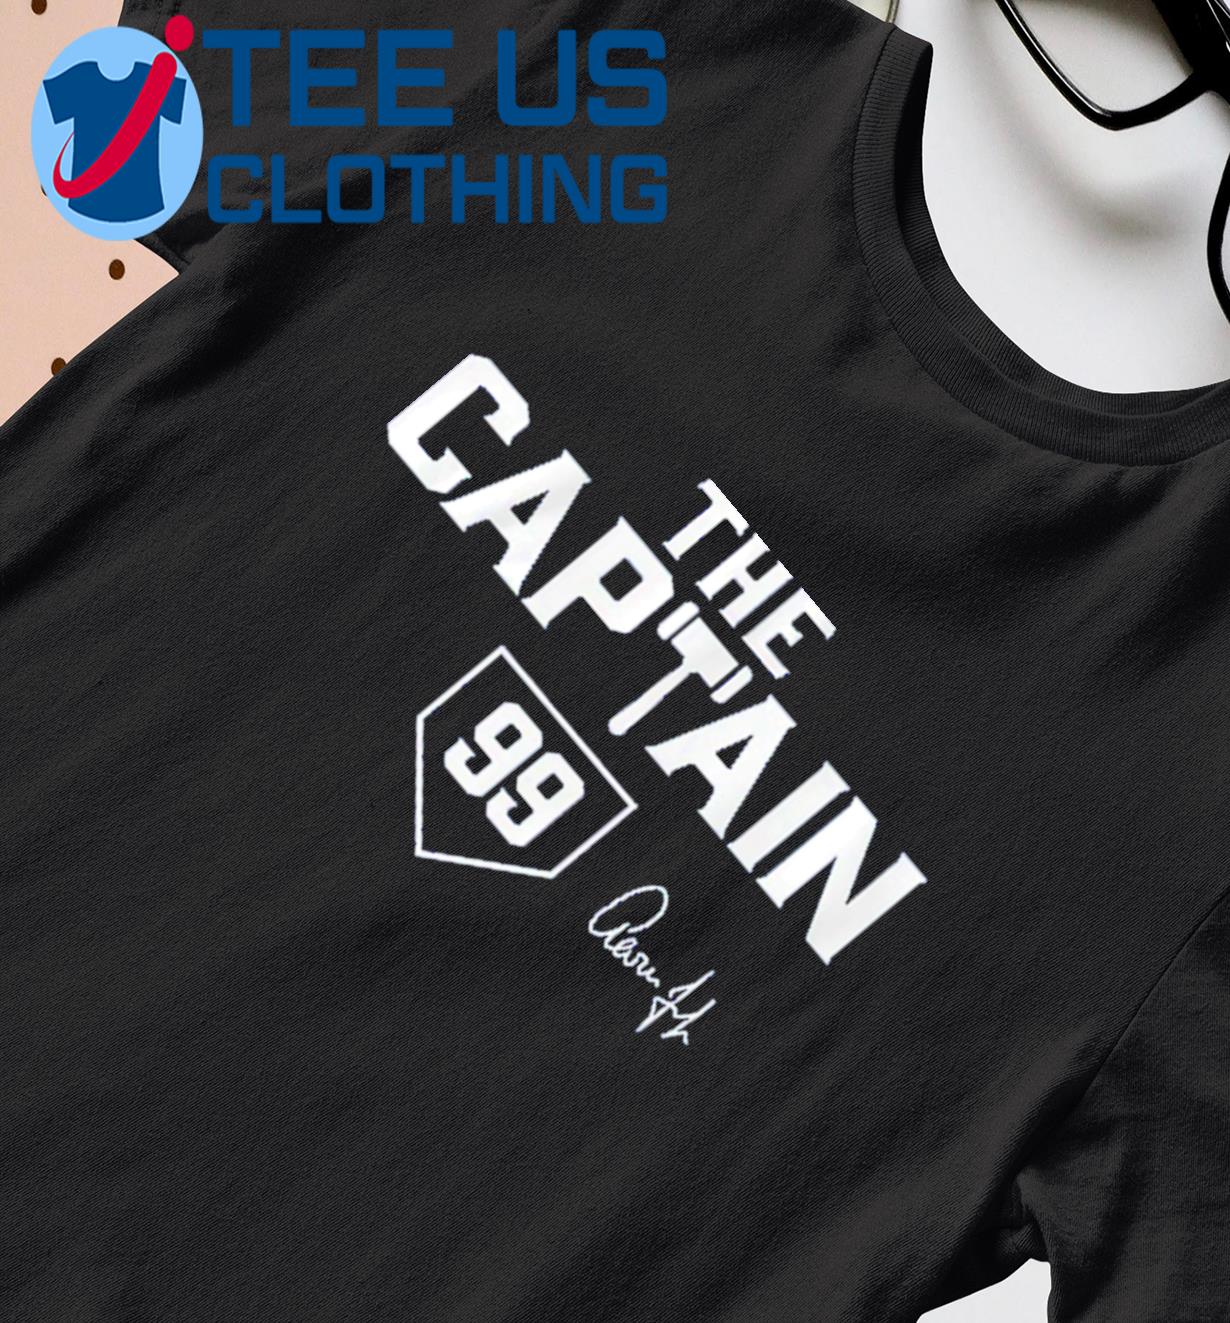 Aaron Judge 99 The Captain Signature Shirt, hoodie, sweater, long sleeve  and tank top